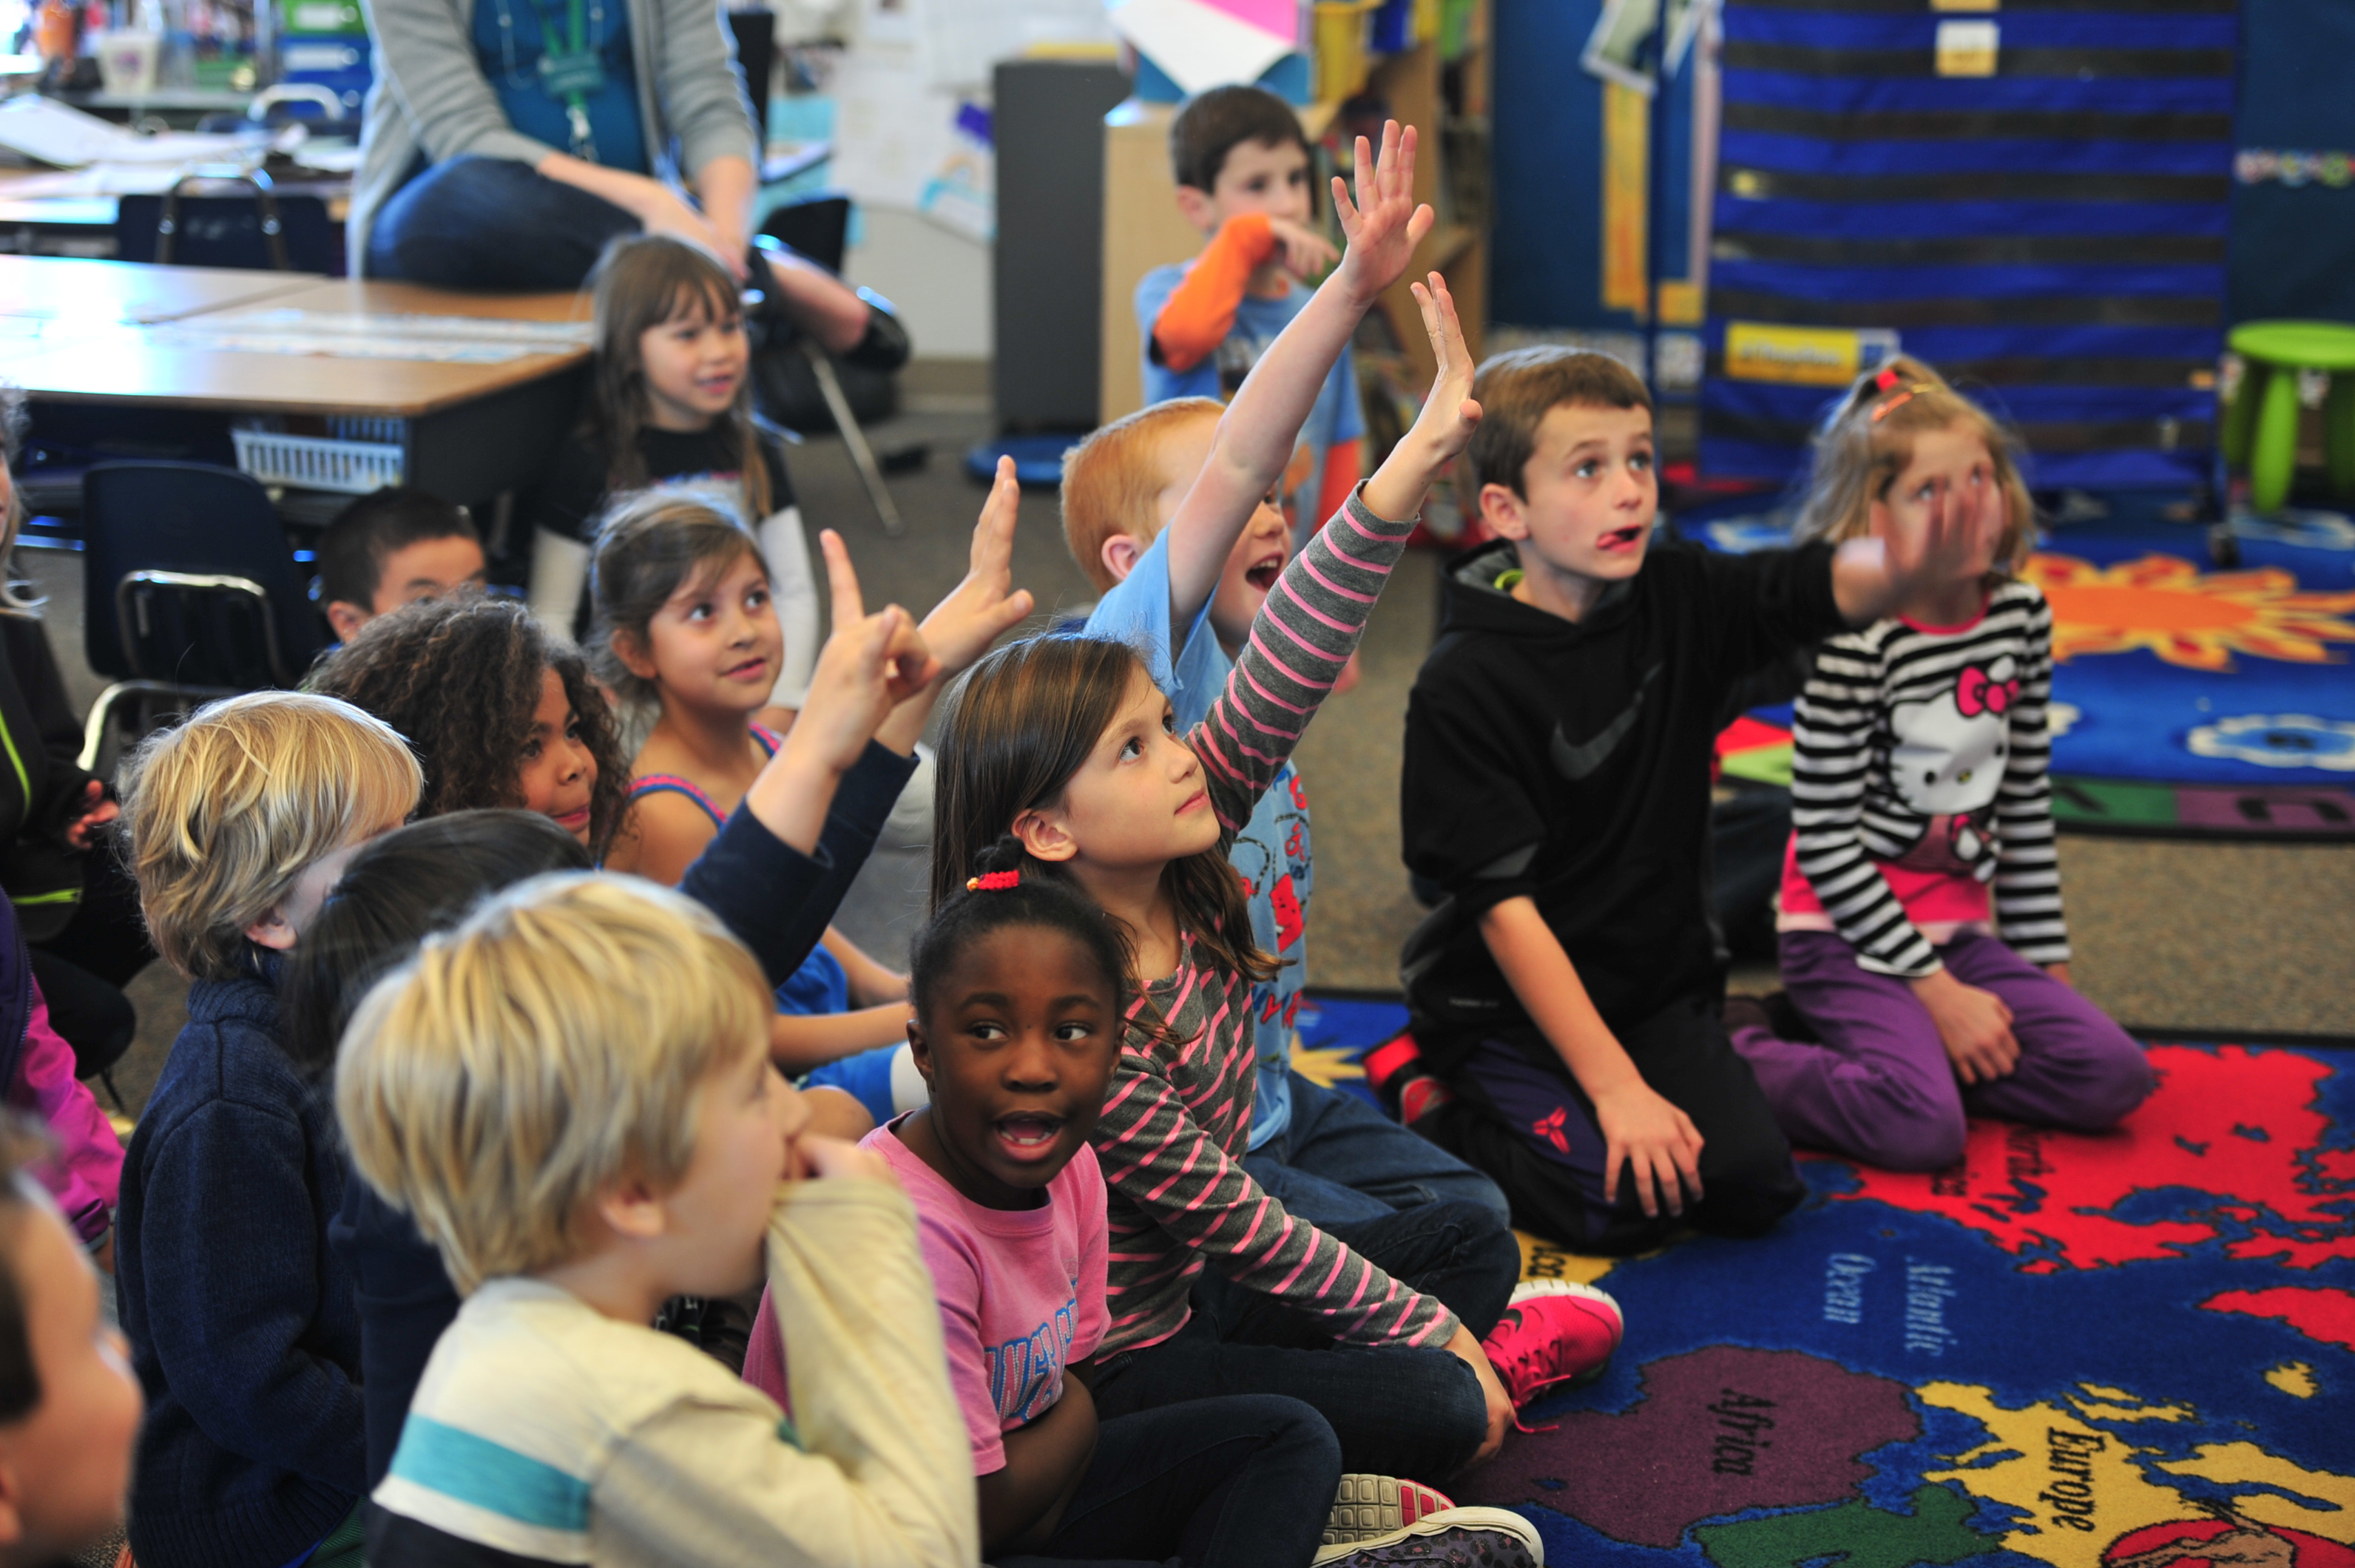 children sitting on floor in a classroom with their hands raised